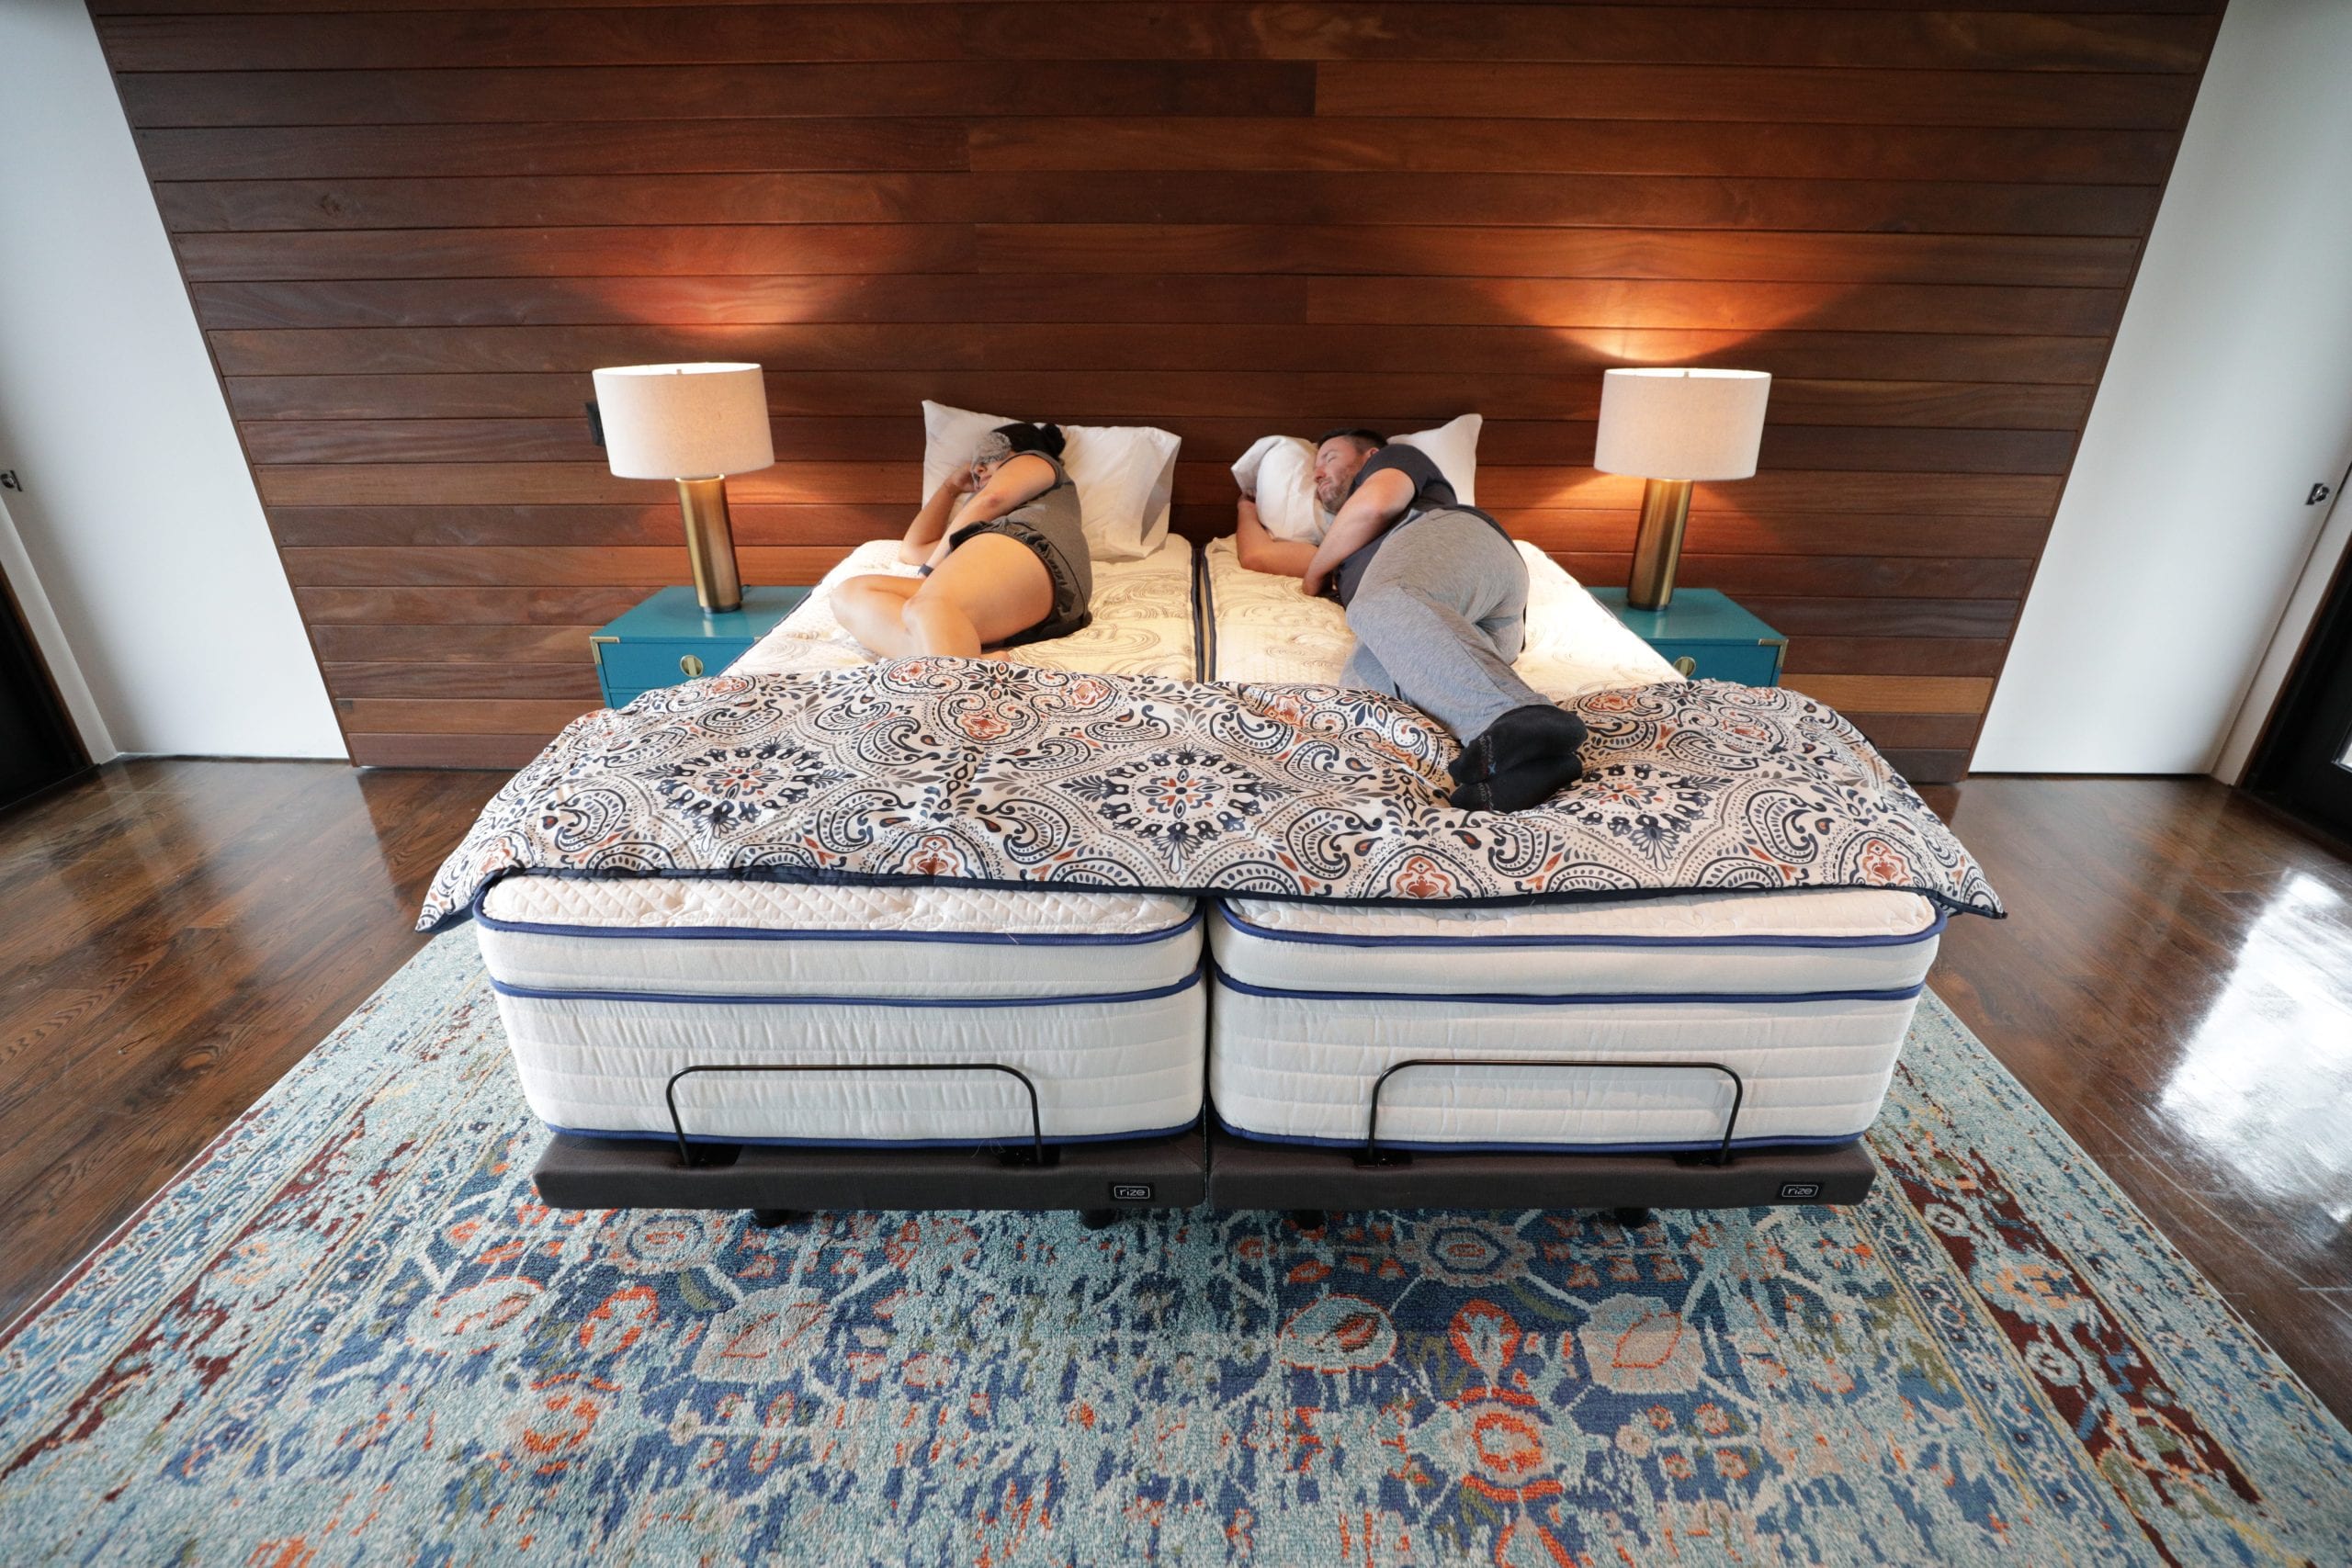 Split King Vs Bed How To Choose, Does 2 Twin Beds Make A Cal King